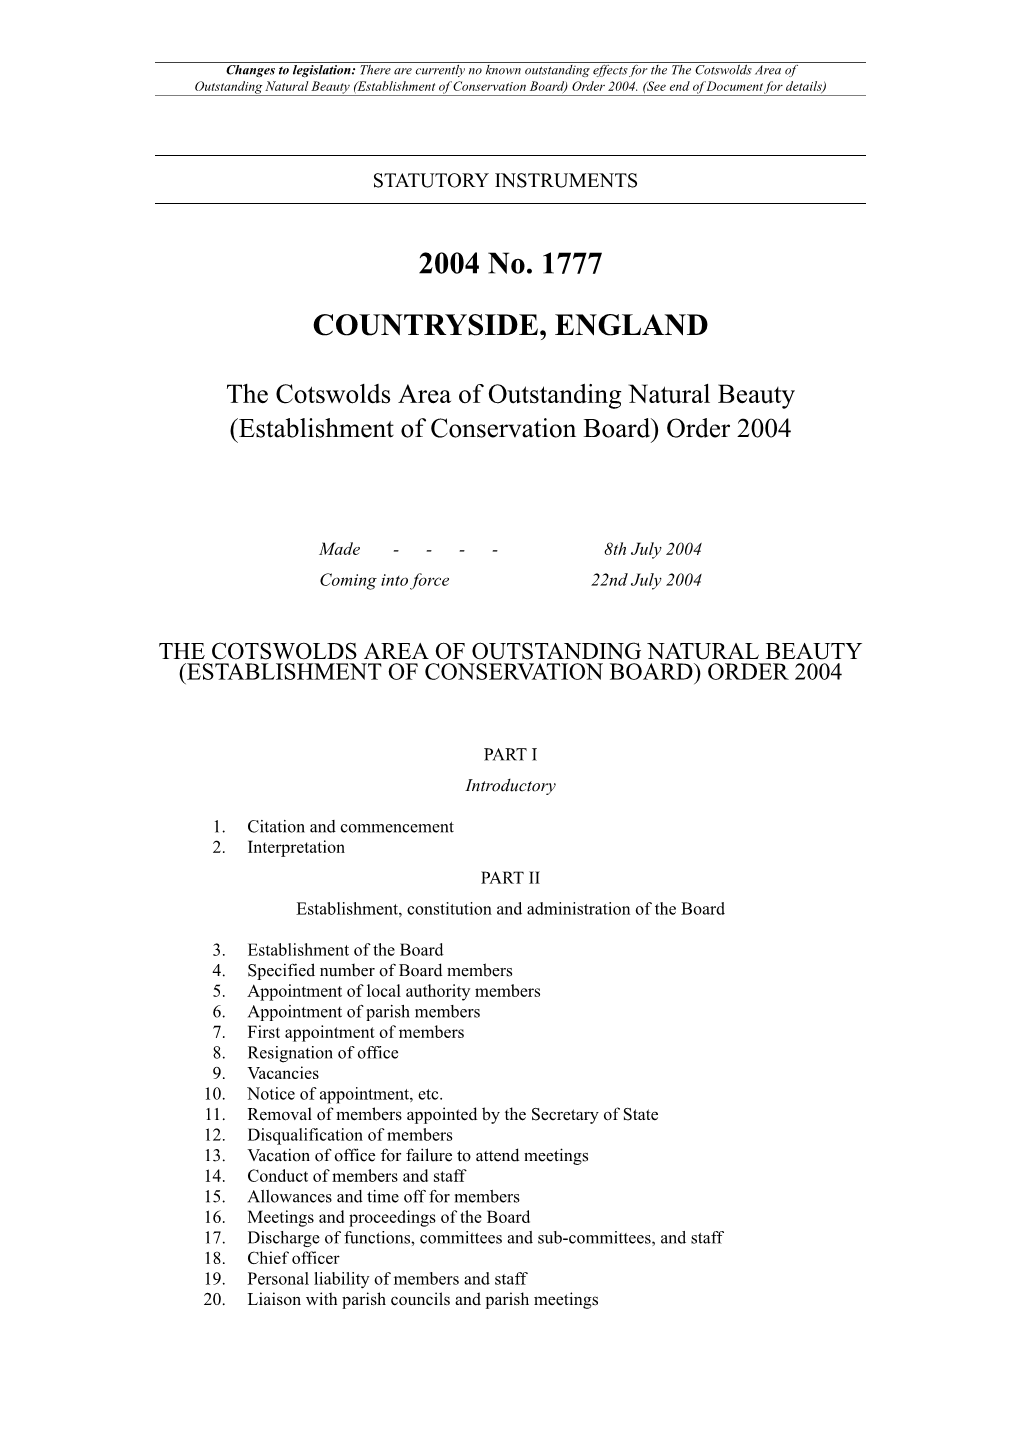 The Cotswolds Area of Outstanding Natural Beauty (Establishment of Conservation Board) Order 2004